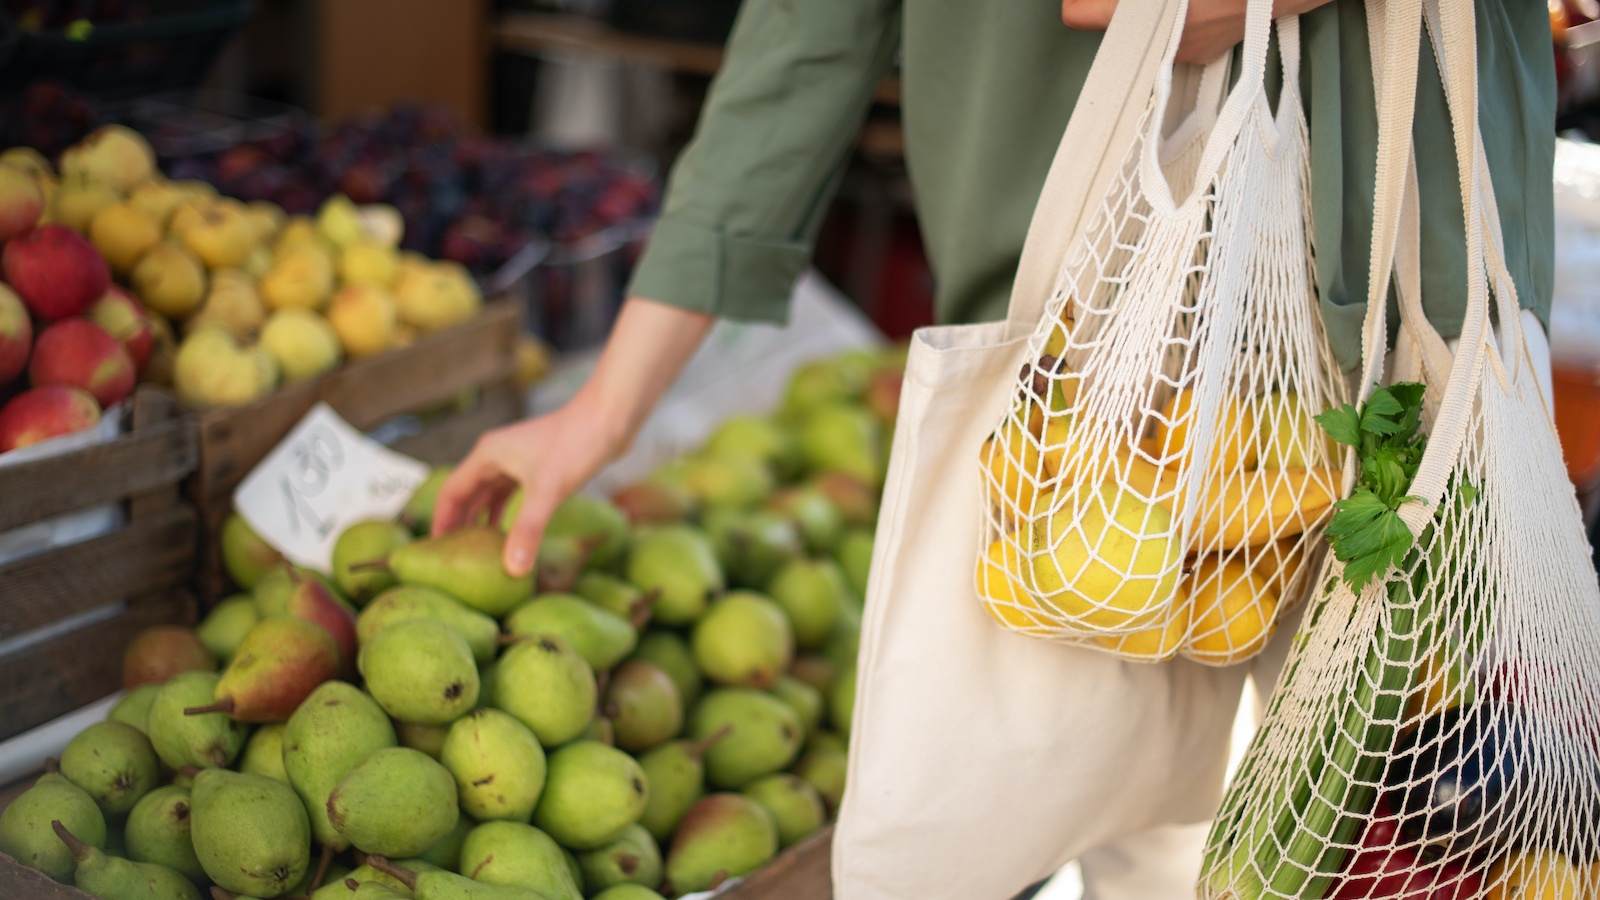 50 Ways to Shop Healthy On a Budget